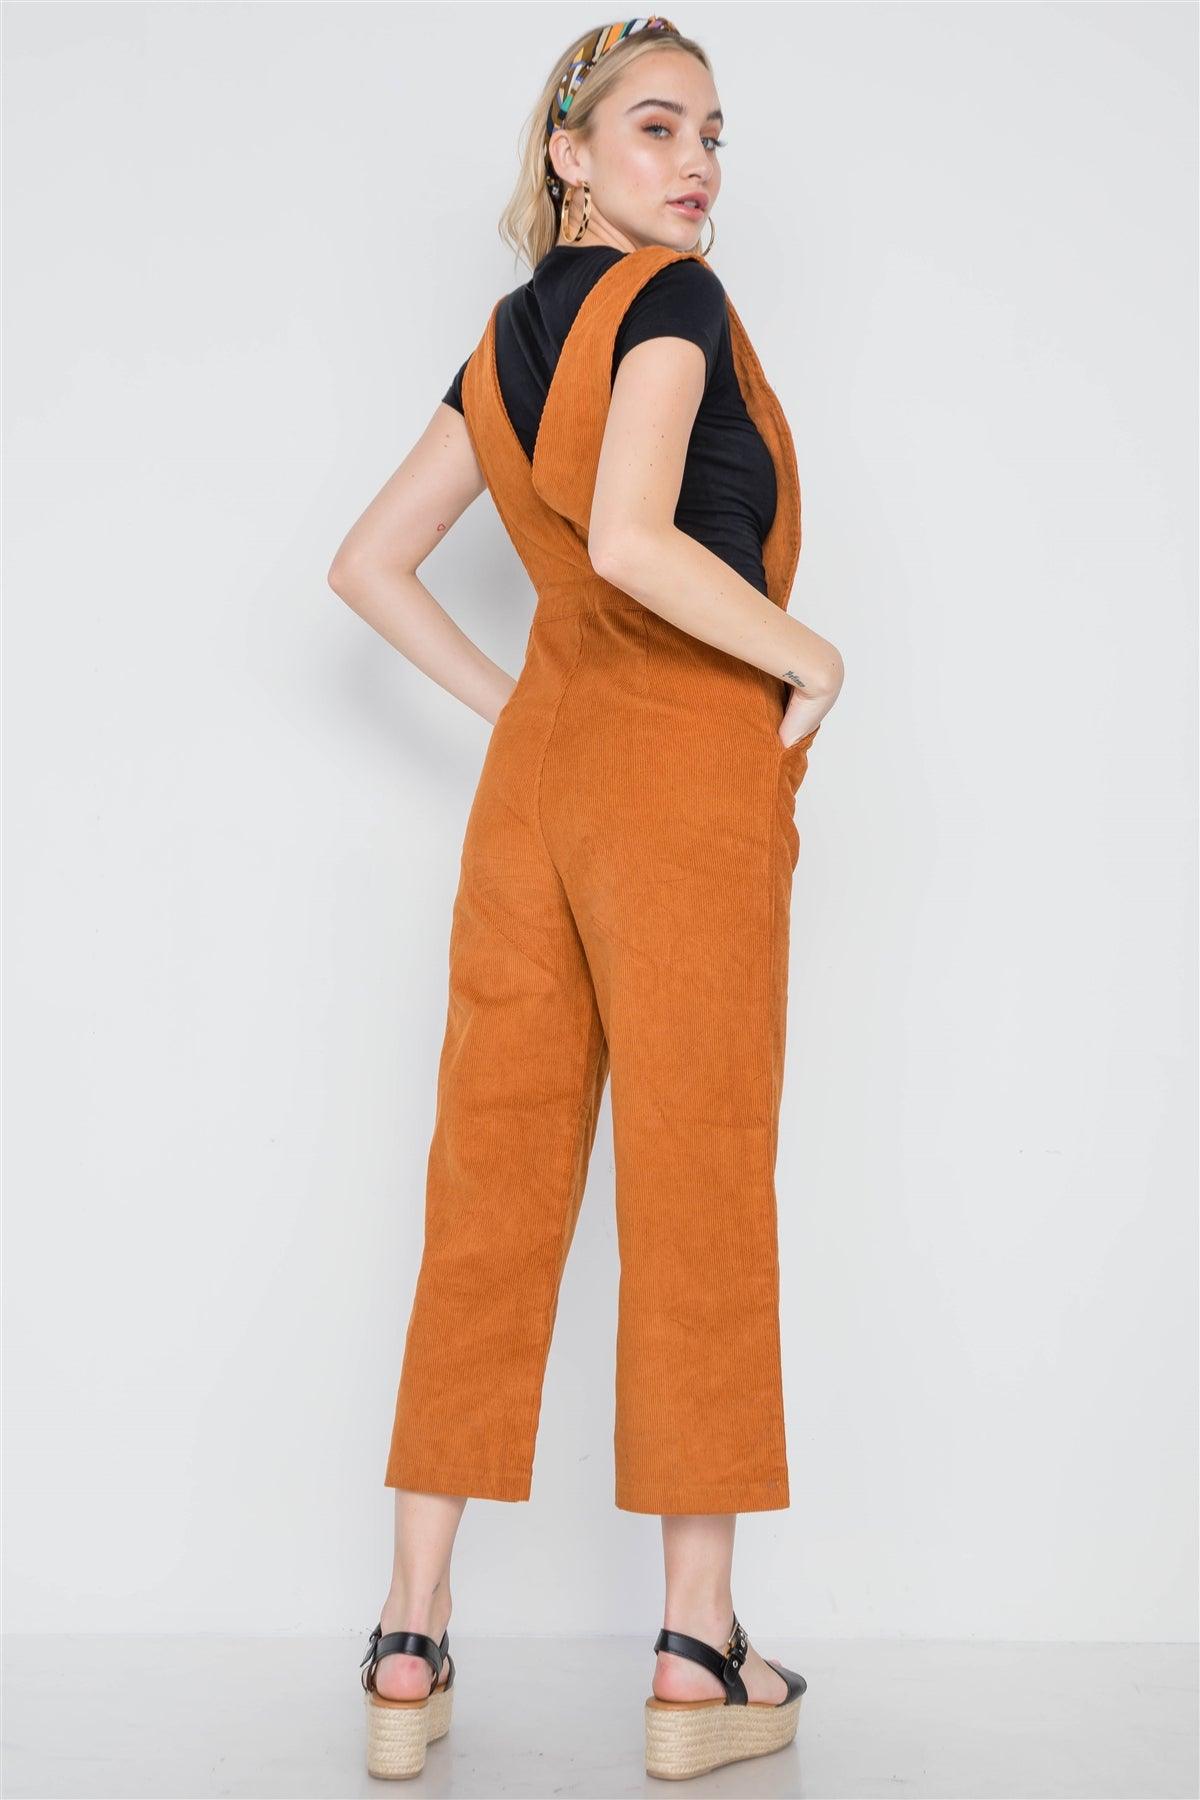 Camel Corduroy Button Front Ankle Length Overall /1-1-1